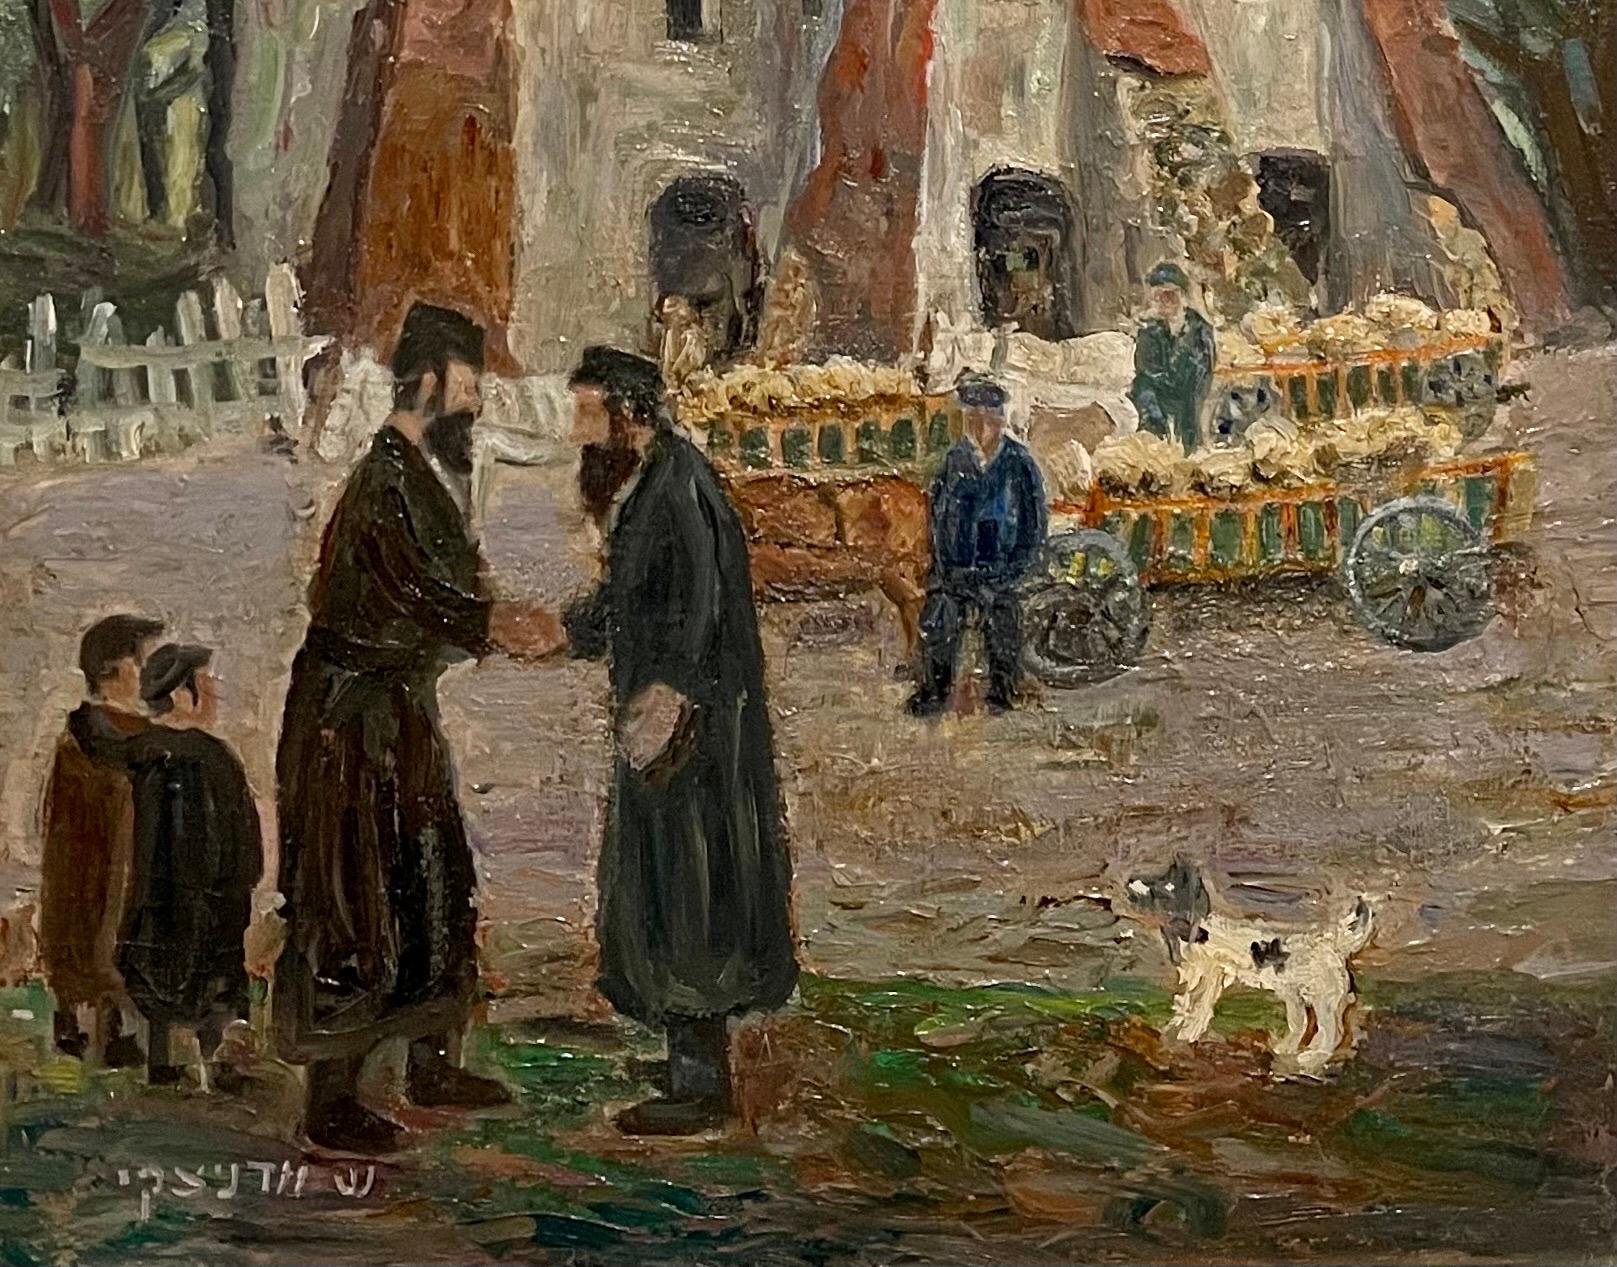 Polish Yiddish Shtetl Kuzmir Jewish Oil Painting Judaica Synagogue with Rabbis - Brown Landscape Painting by Shmuel Woodnitzky